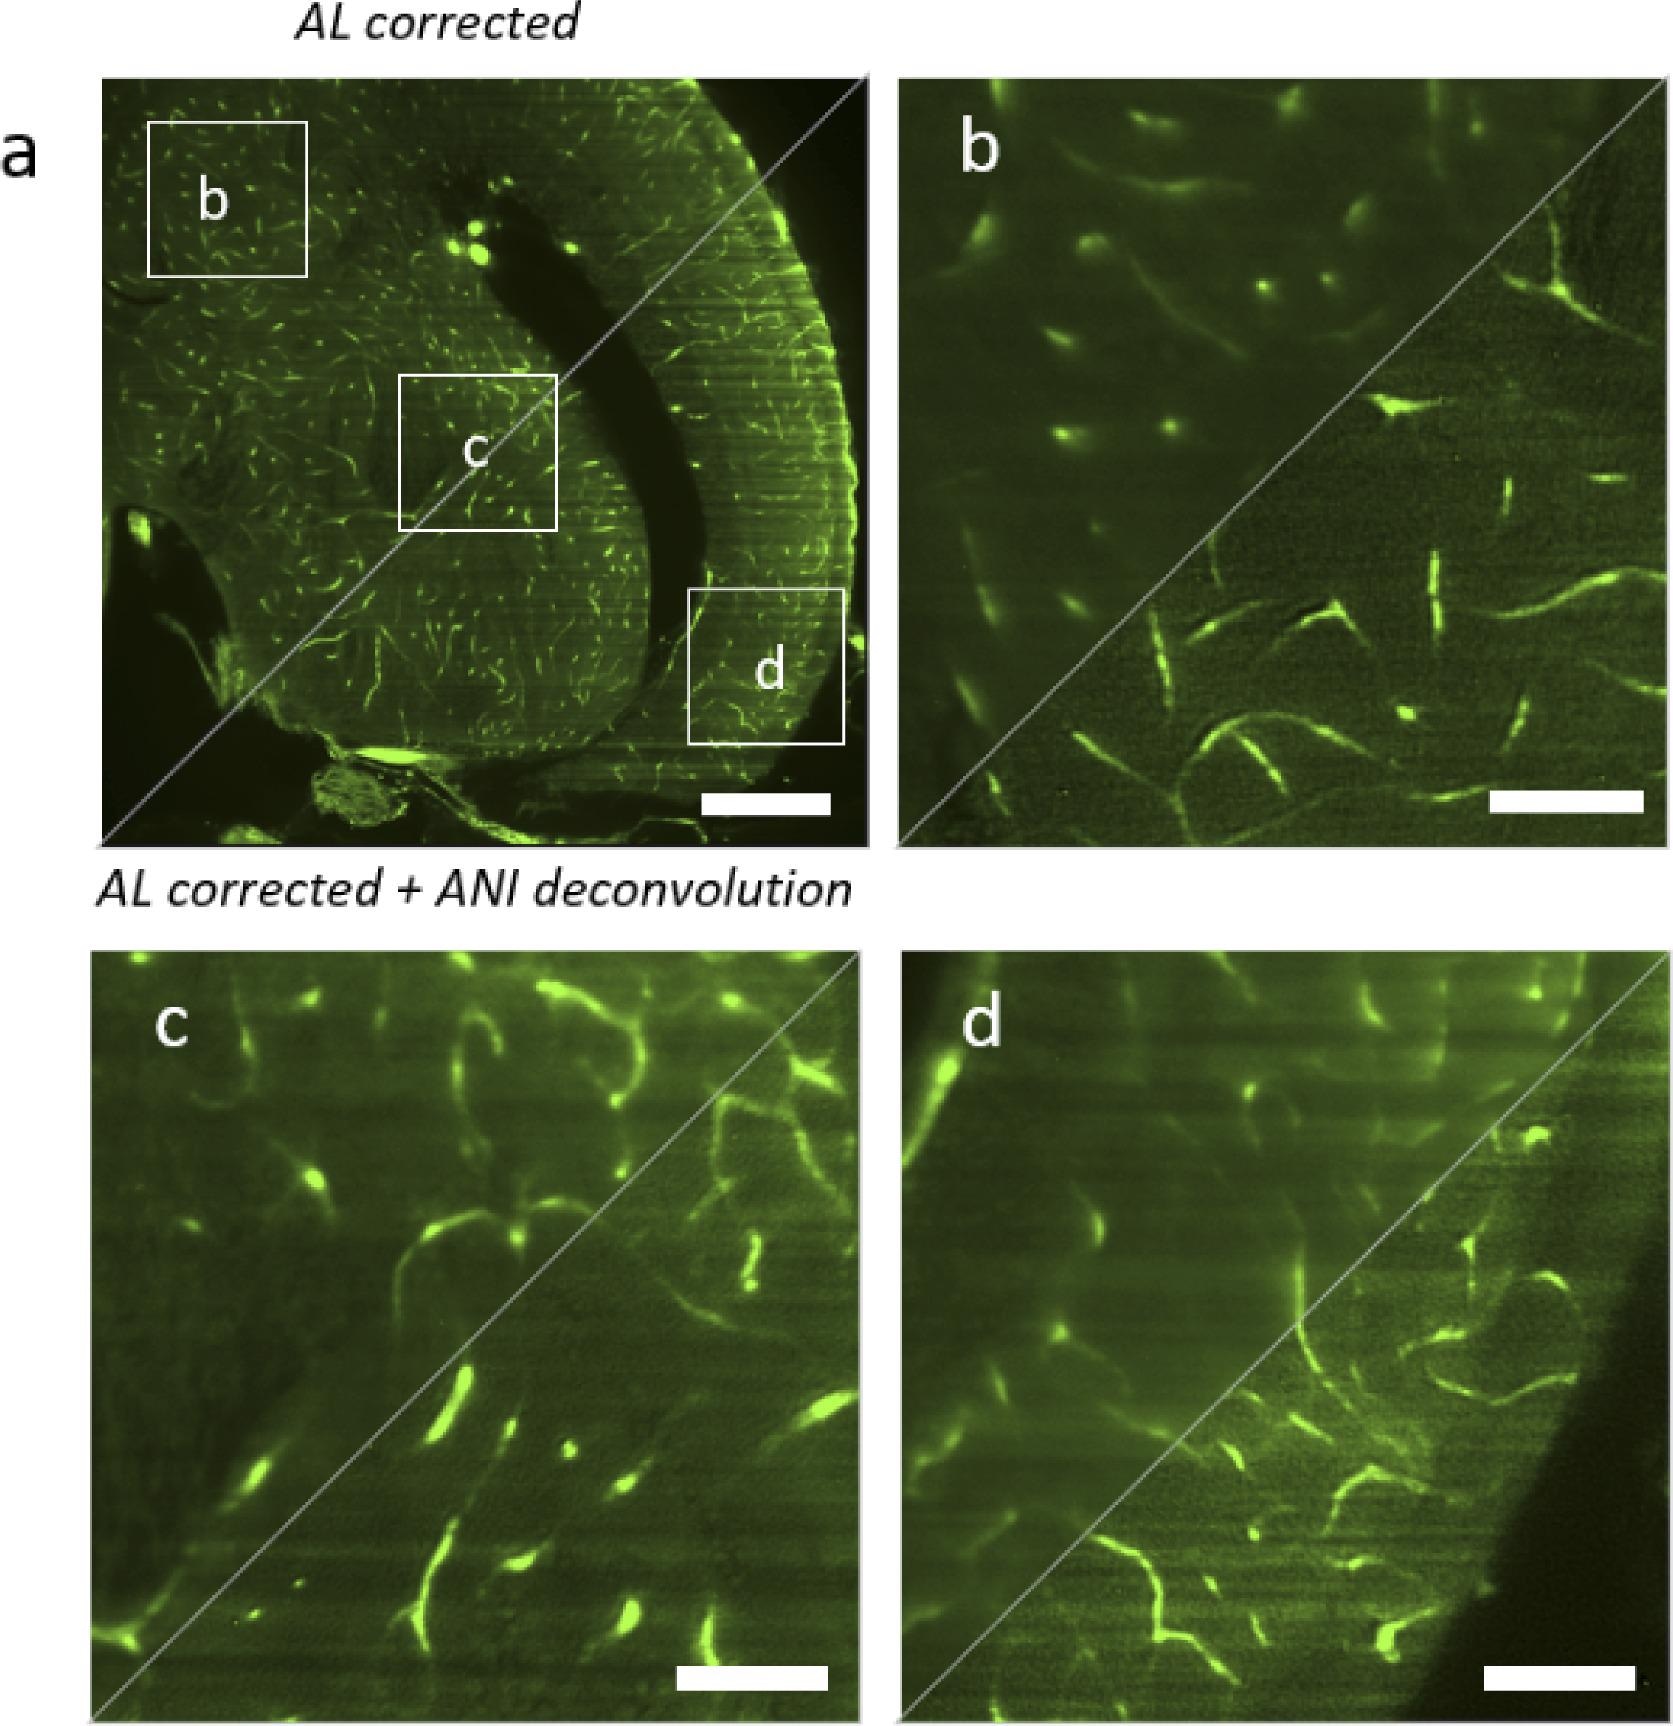 Comparison between hardware correction with adaptive lens (AL) and the combination of hardware correction with anisoplanatic deconvolution (ANI). AL corrected is shown in the top left triangles, AL corrected with ANI deconvolution is shown in the bottom right triangle. (a) Full image of a zebrafish brain plane (b) Magnified region in the top left corner. (c) Magnified region in the center. (d) Magnified region in the bottom right corner. Scalebar is 200 µm in a and 50 µm in b–d.